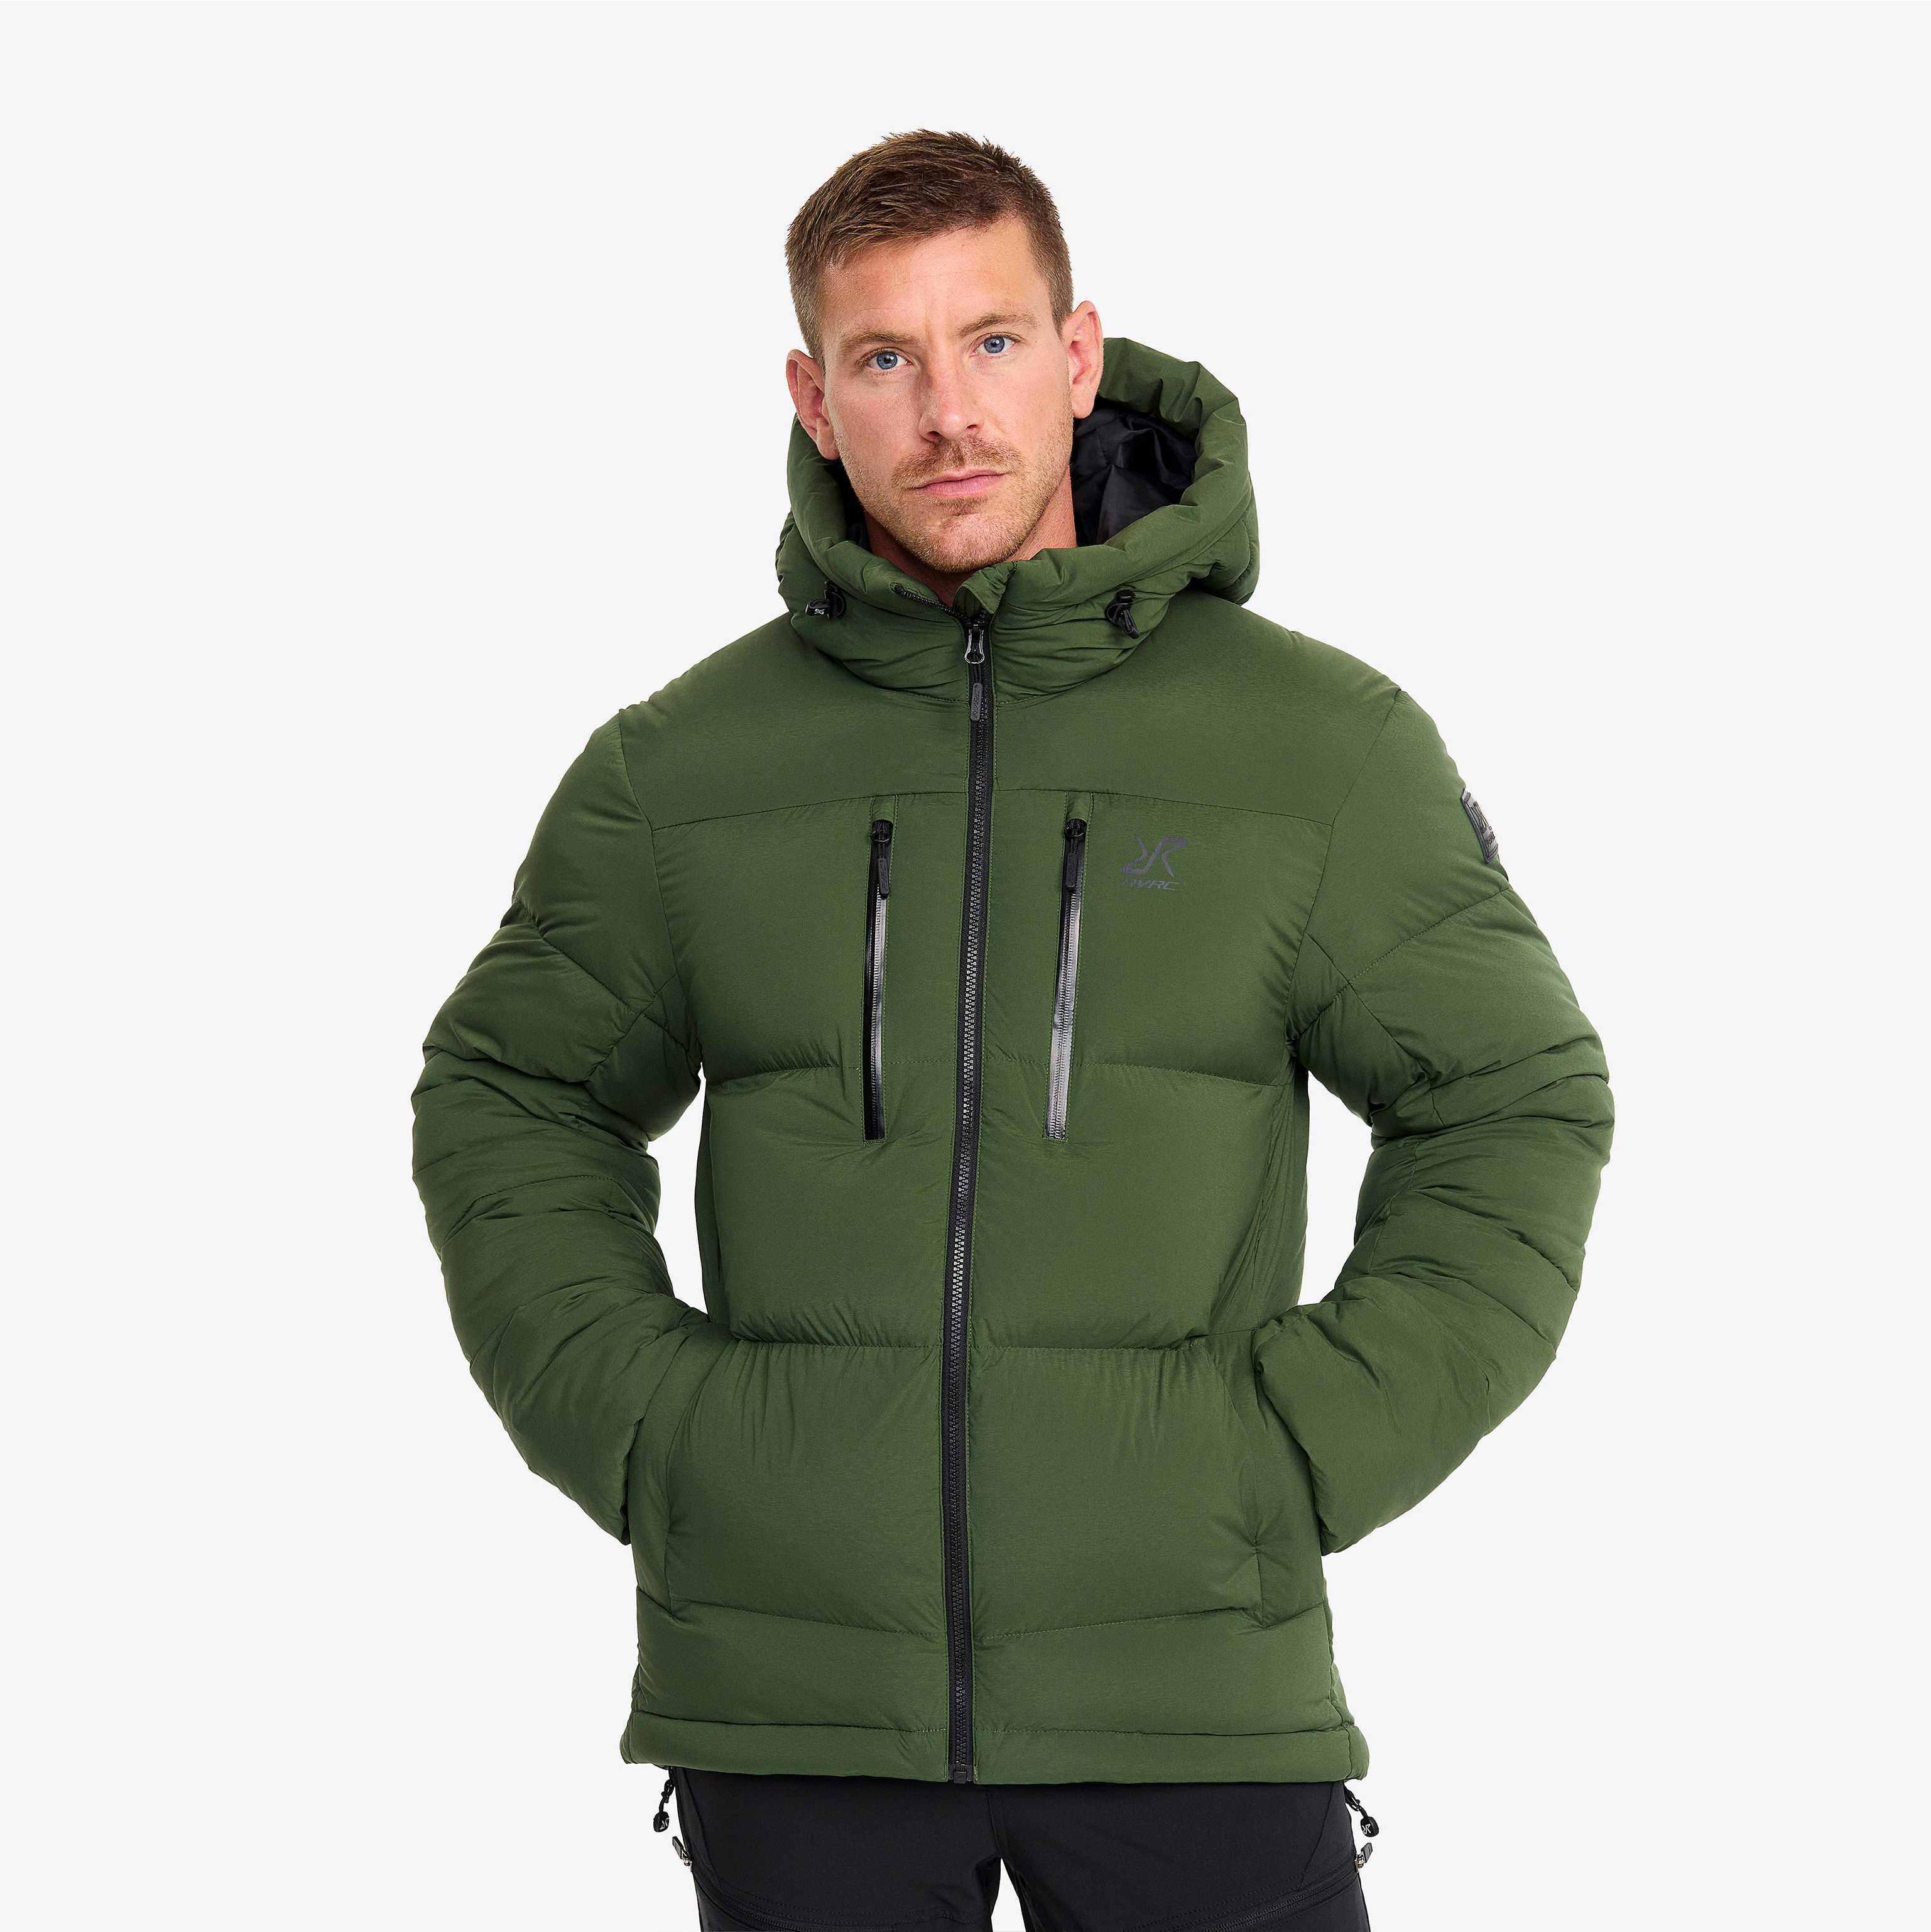 Flexpedition Down Jacket Black Forest Hombres